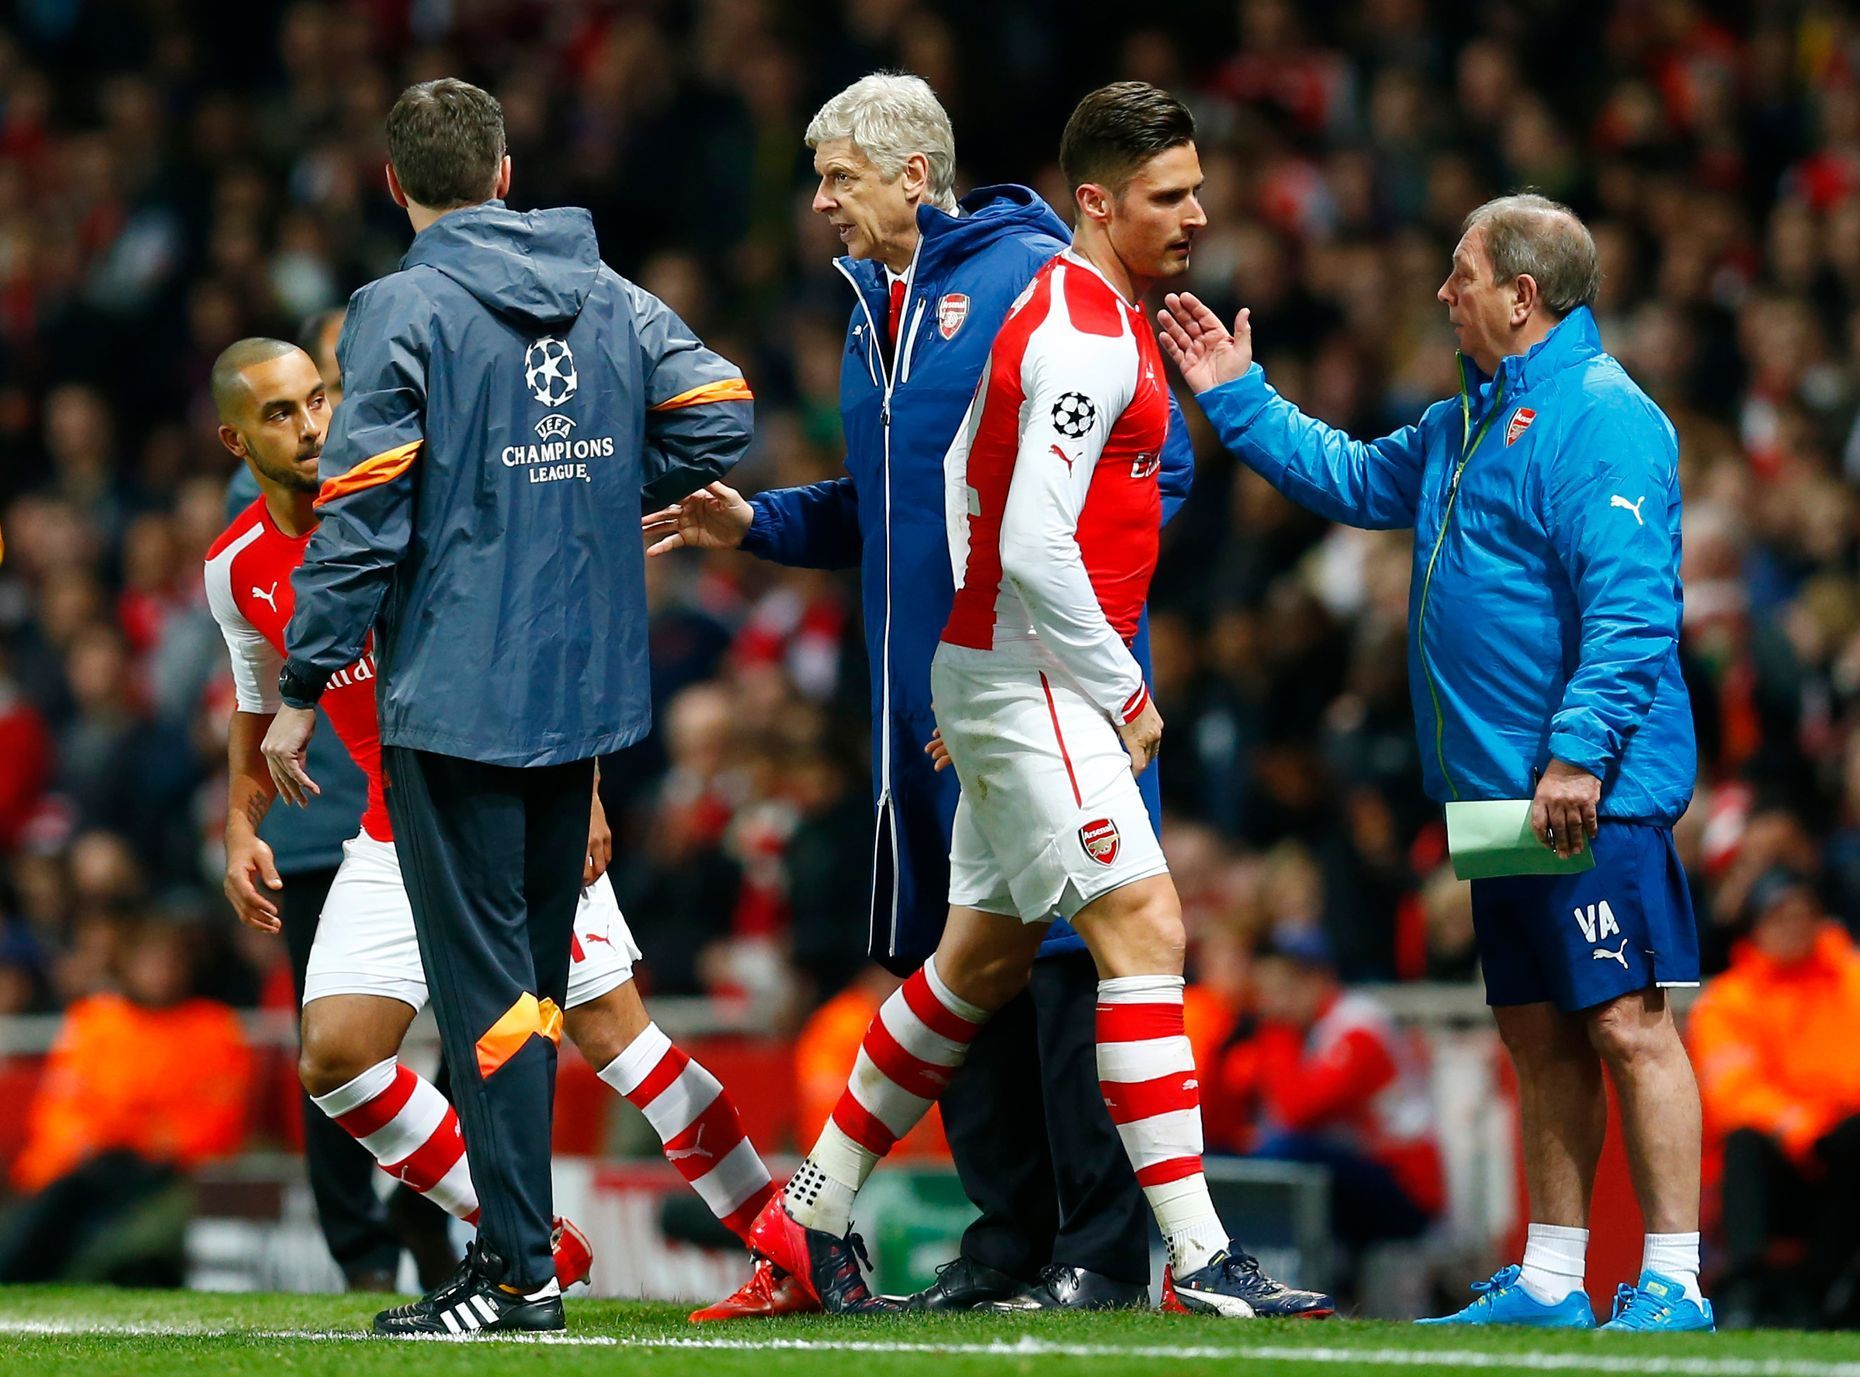 Football: Arsenal's Olivier Giroud is substituted for Theo Walcott  as manager Arsene Wenger looks on